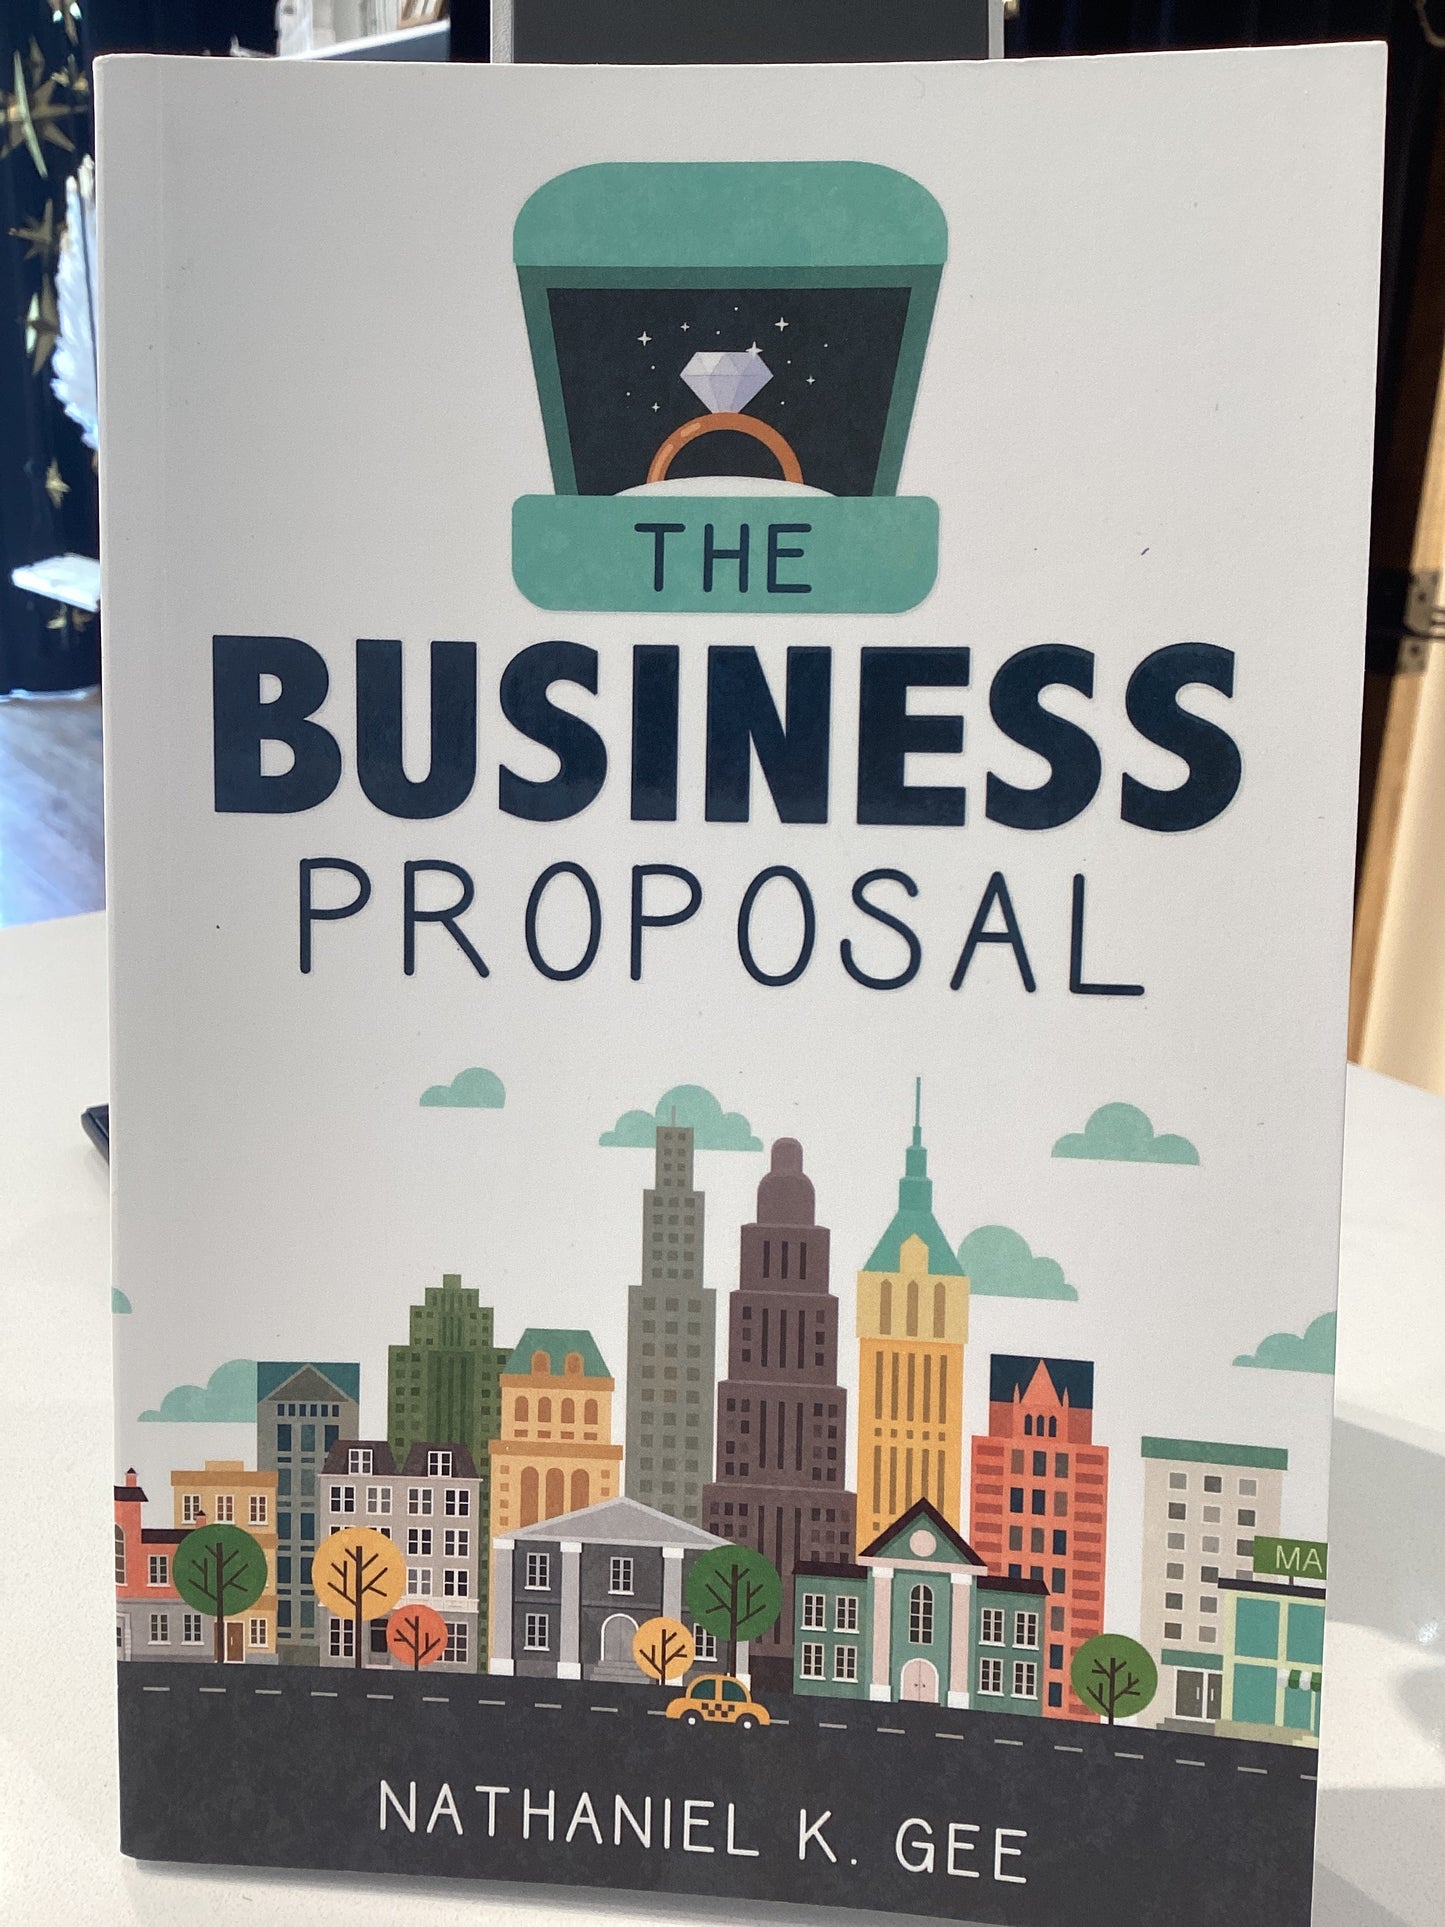 “The Business Proposal” book by Nathaniel Gee